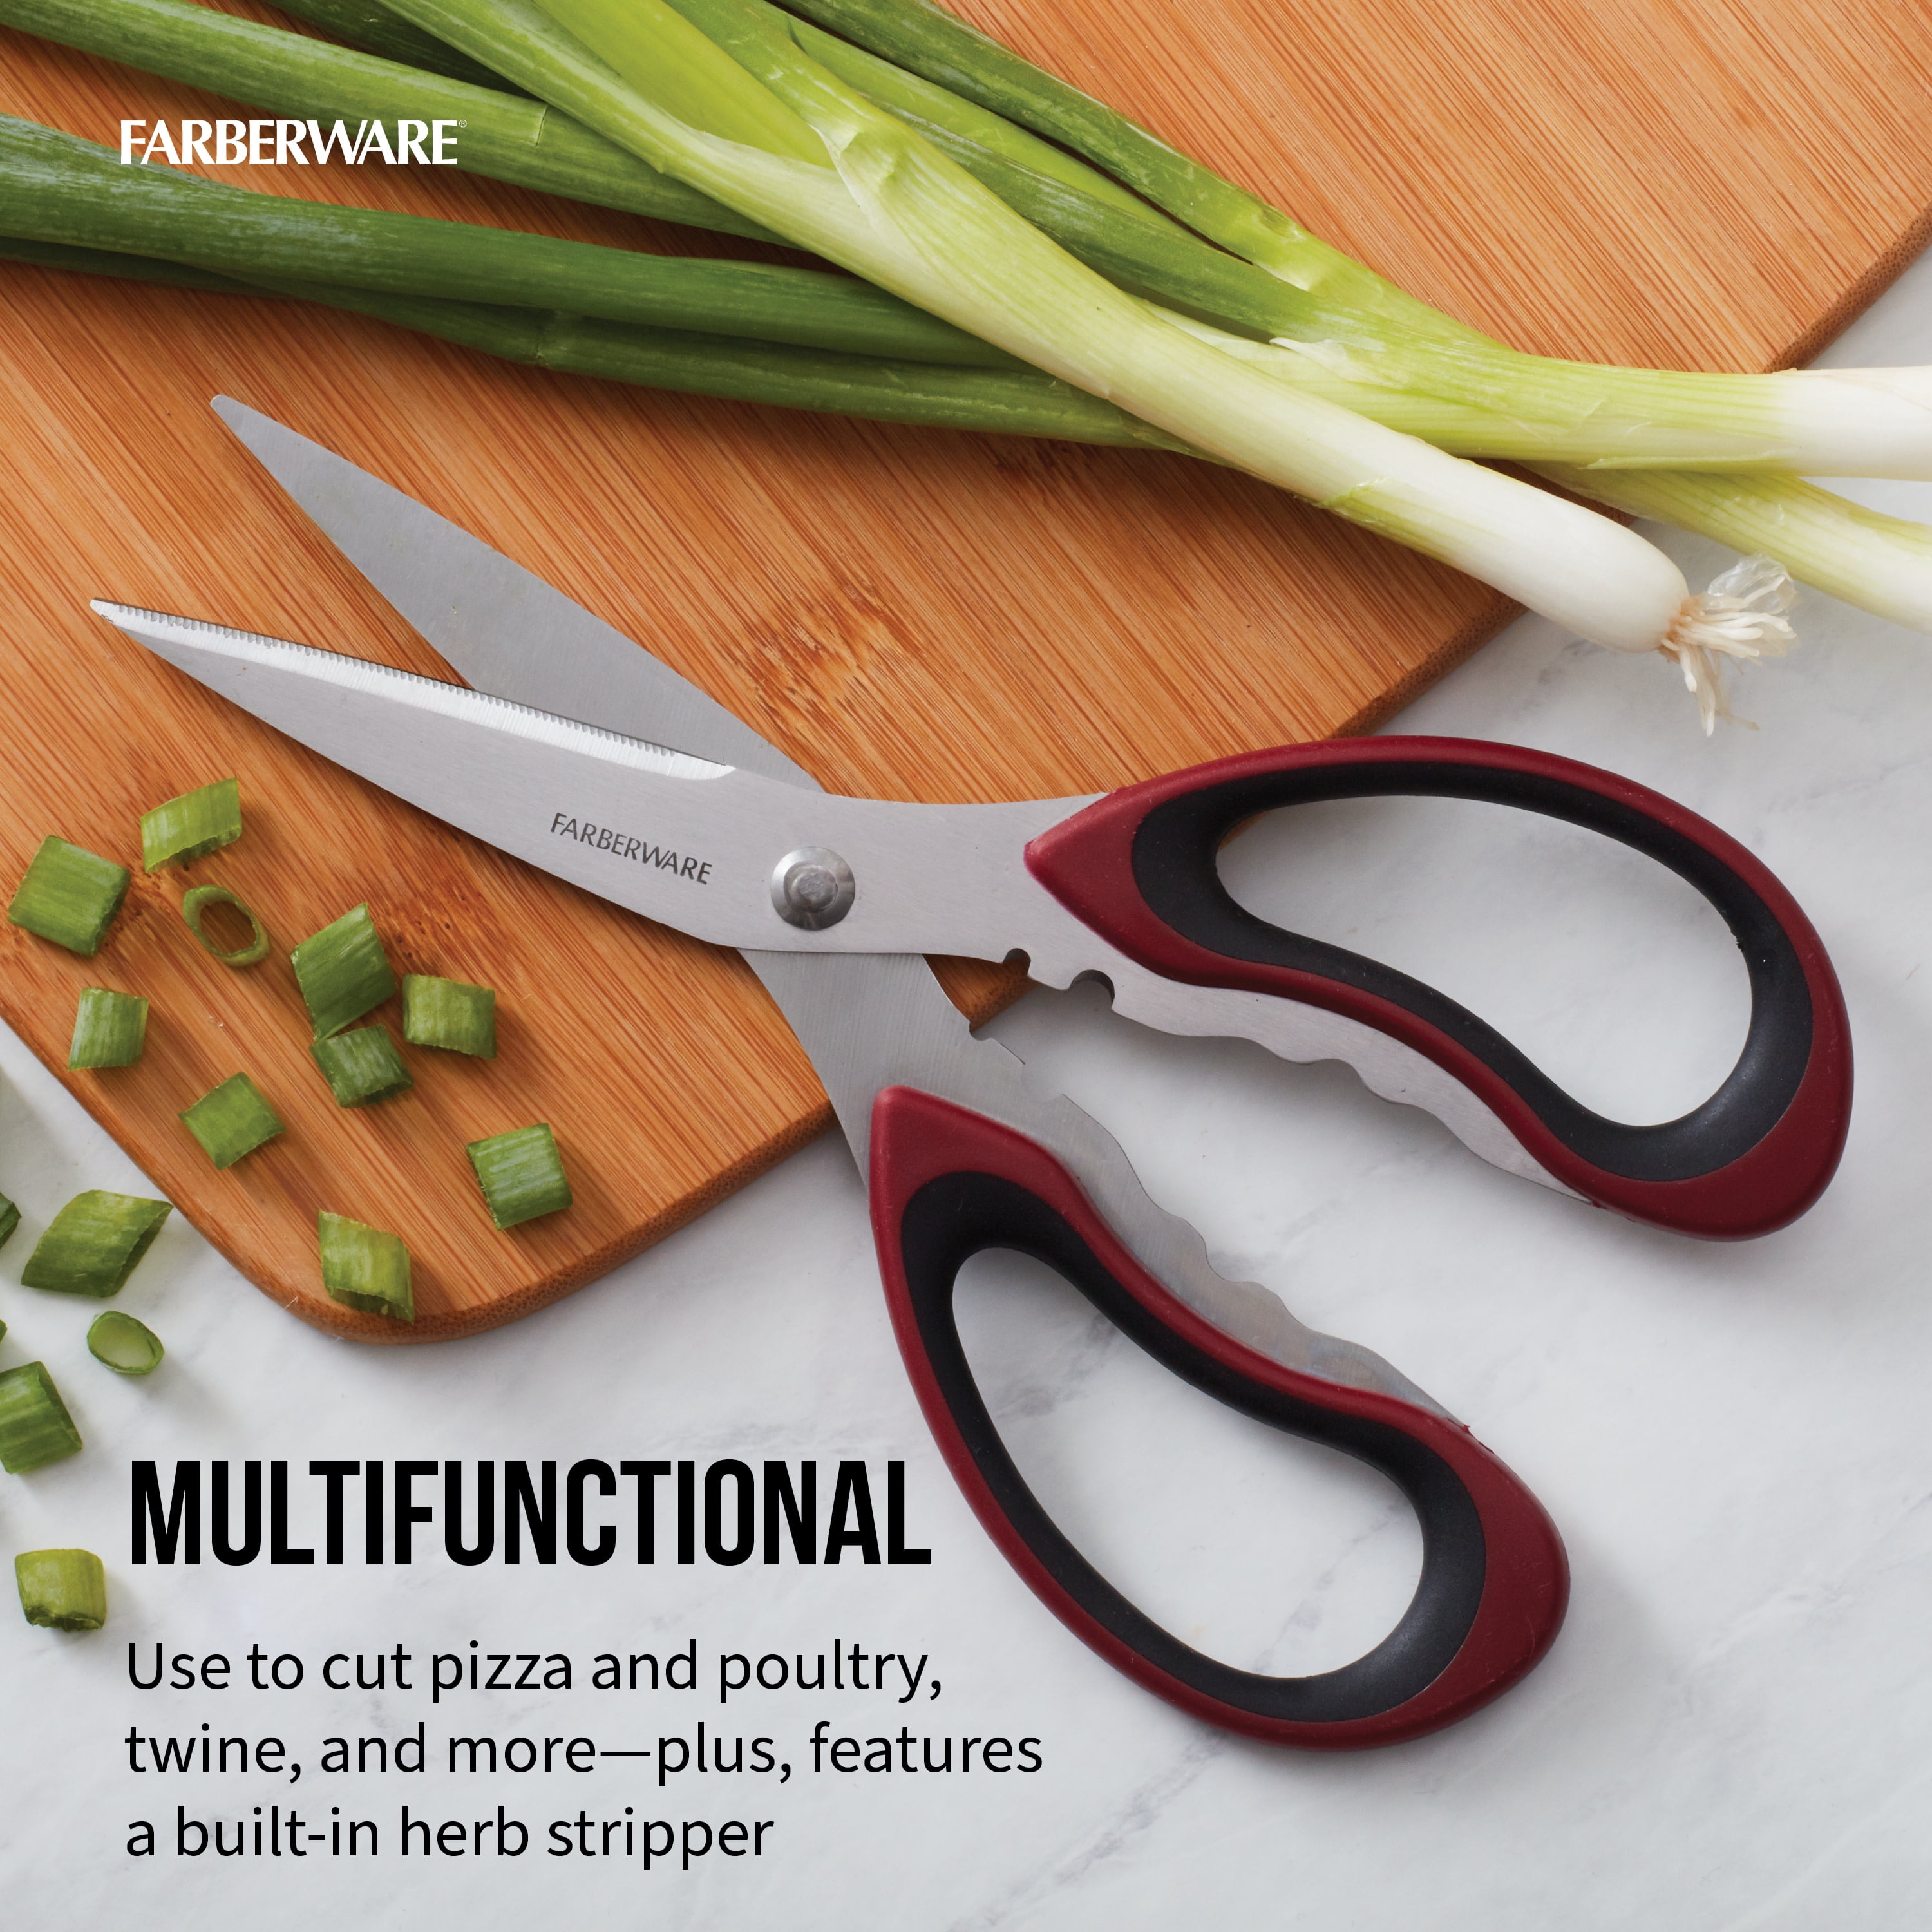 Farberware Soft Grips Stainless Steel Kitchen and Herb Shears with